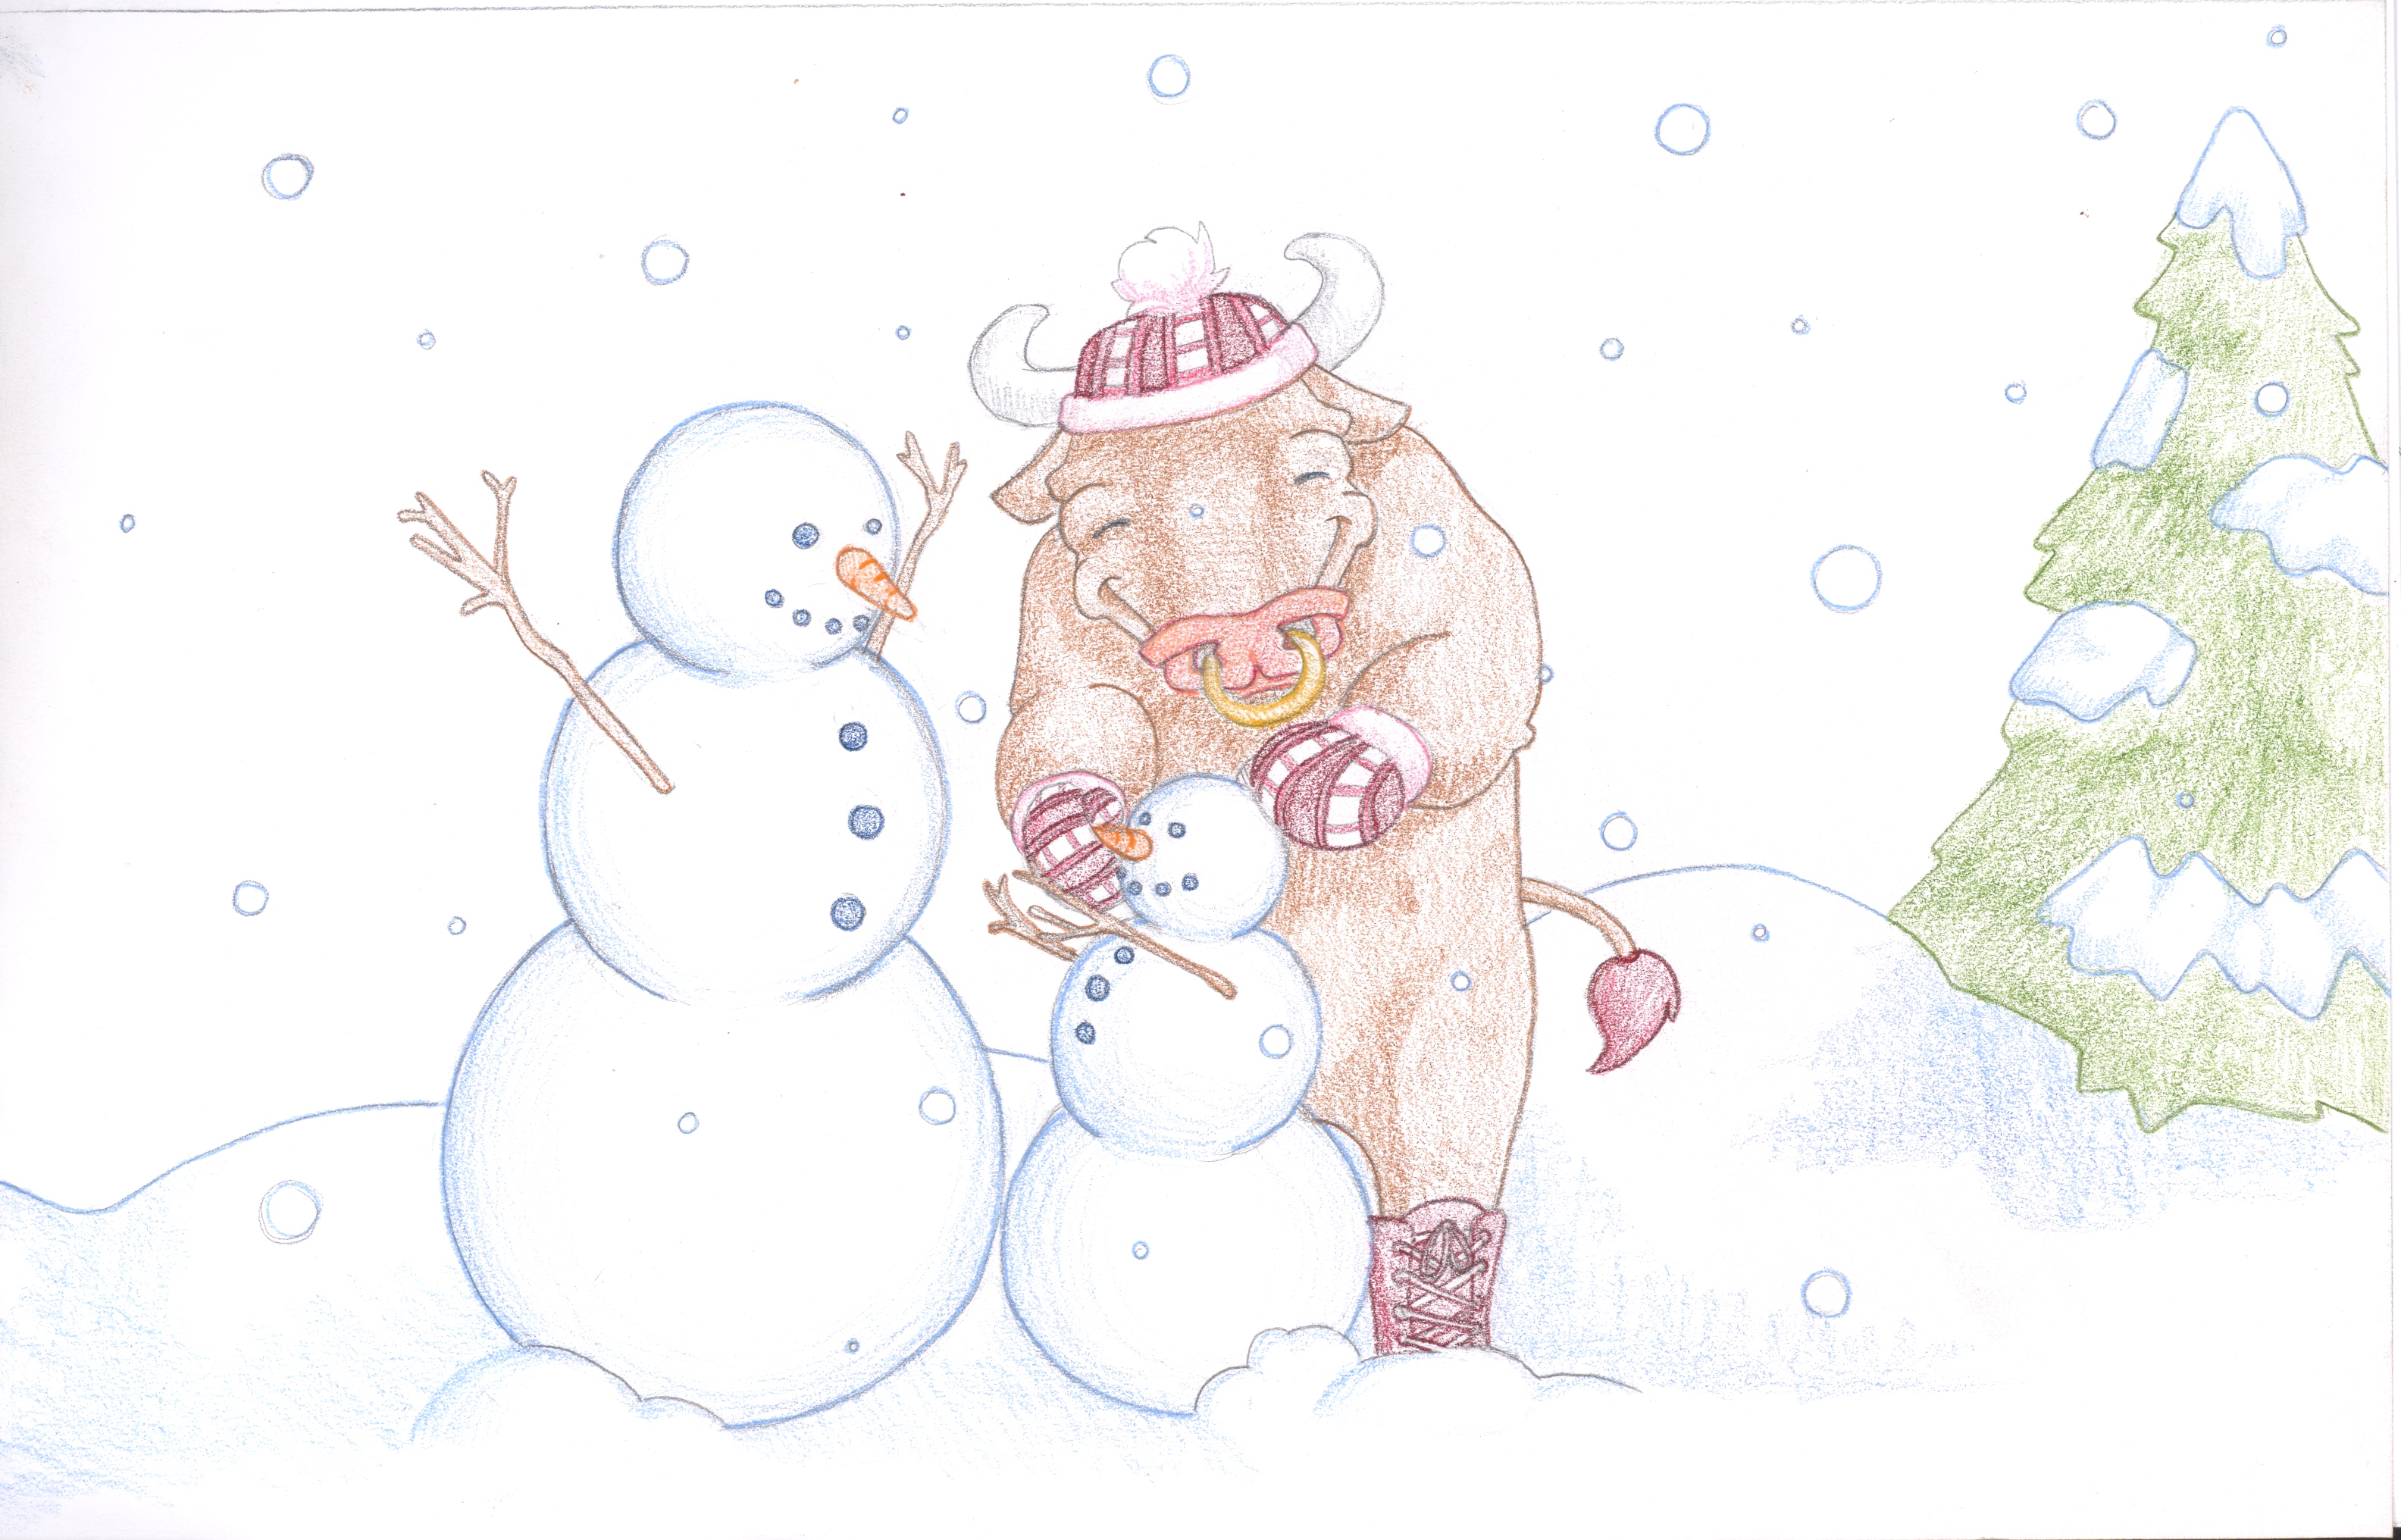 a smiling bull with a hat, boots, and mittens is making a snow child. The snow child is reaching up and smiling at a snow adult who throws it's stick arms out wide for a hug, in the background is an evergreen tree. Snow is falling